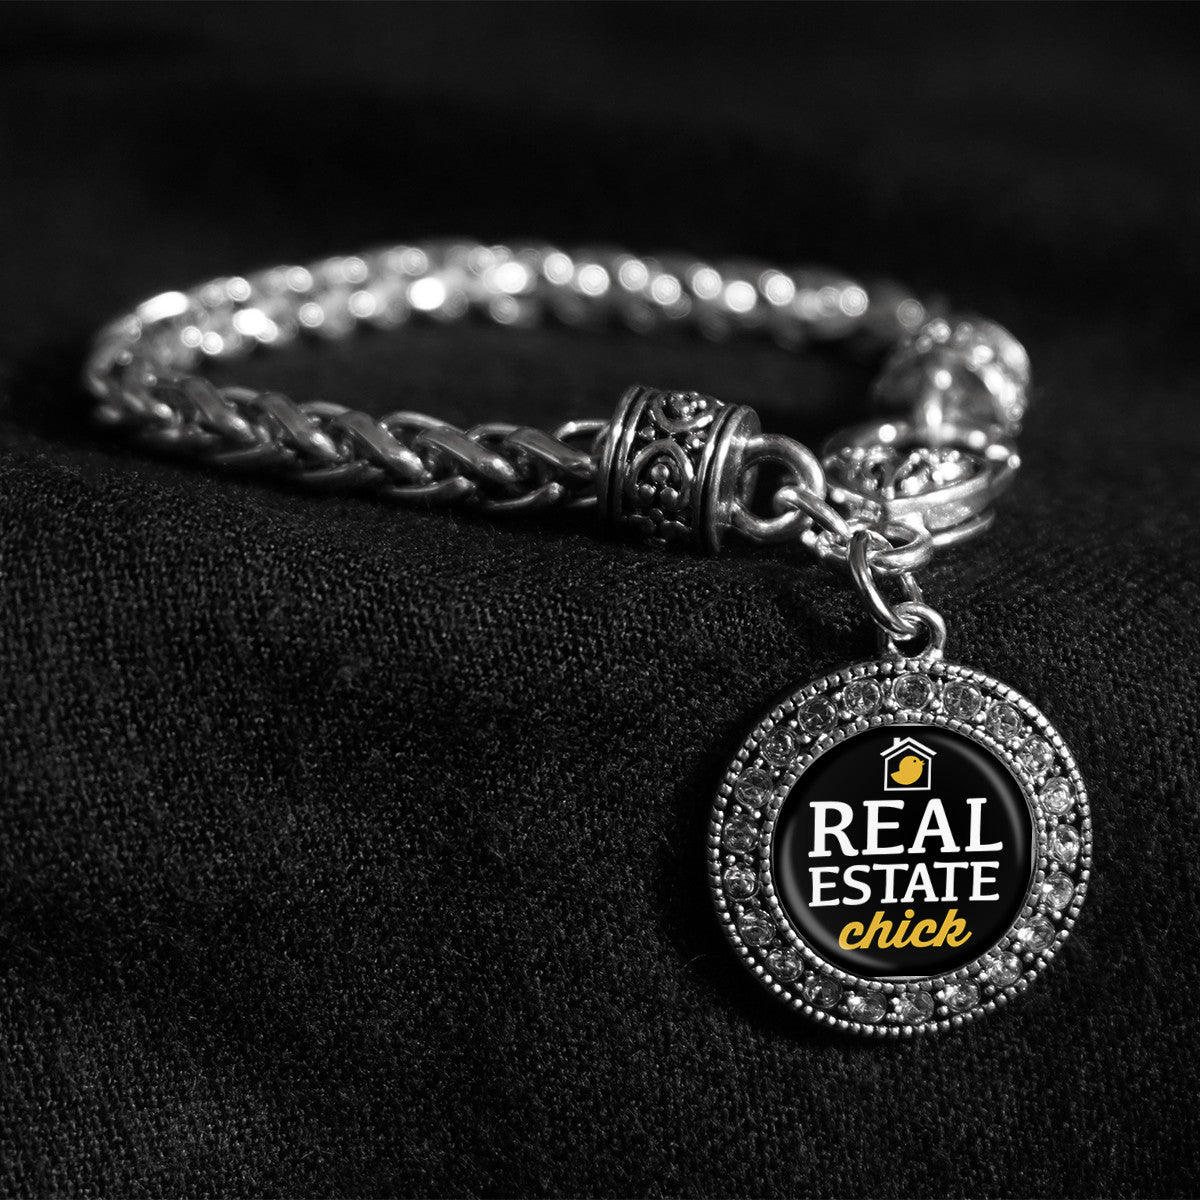 Real Estate Chick Silver Braided Clasp Bracelet